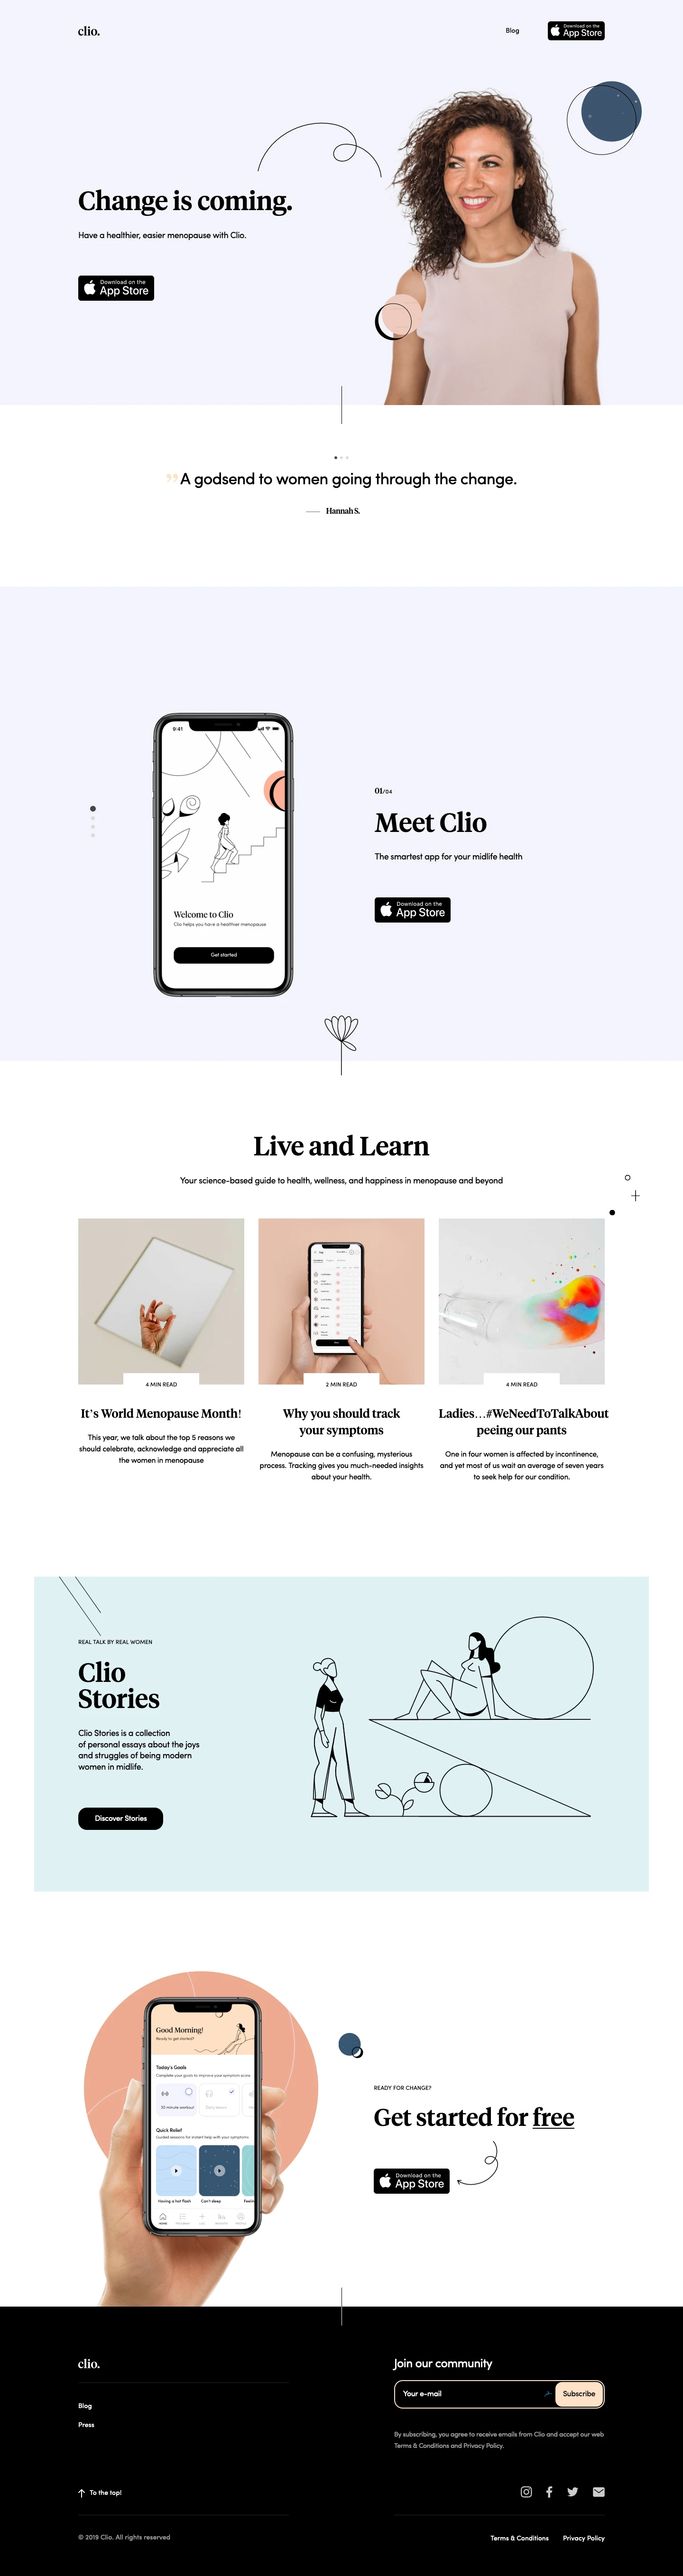 Clio Landing Page Example: Clio is the smartest app to help you through every stage of your menopause journey. Track your symptoms, get personalized insights, and find relief.